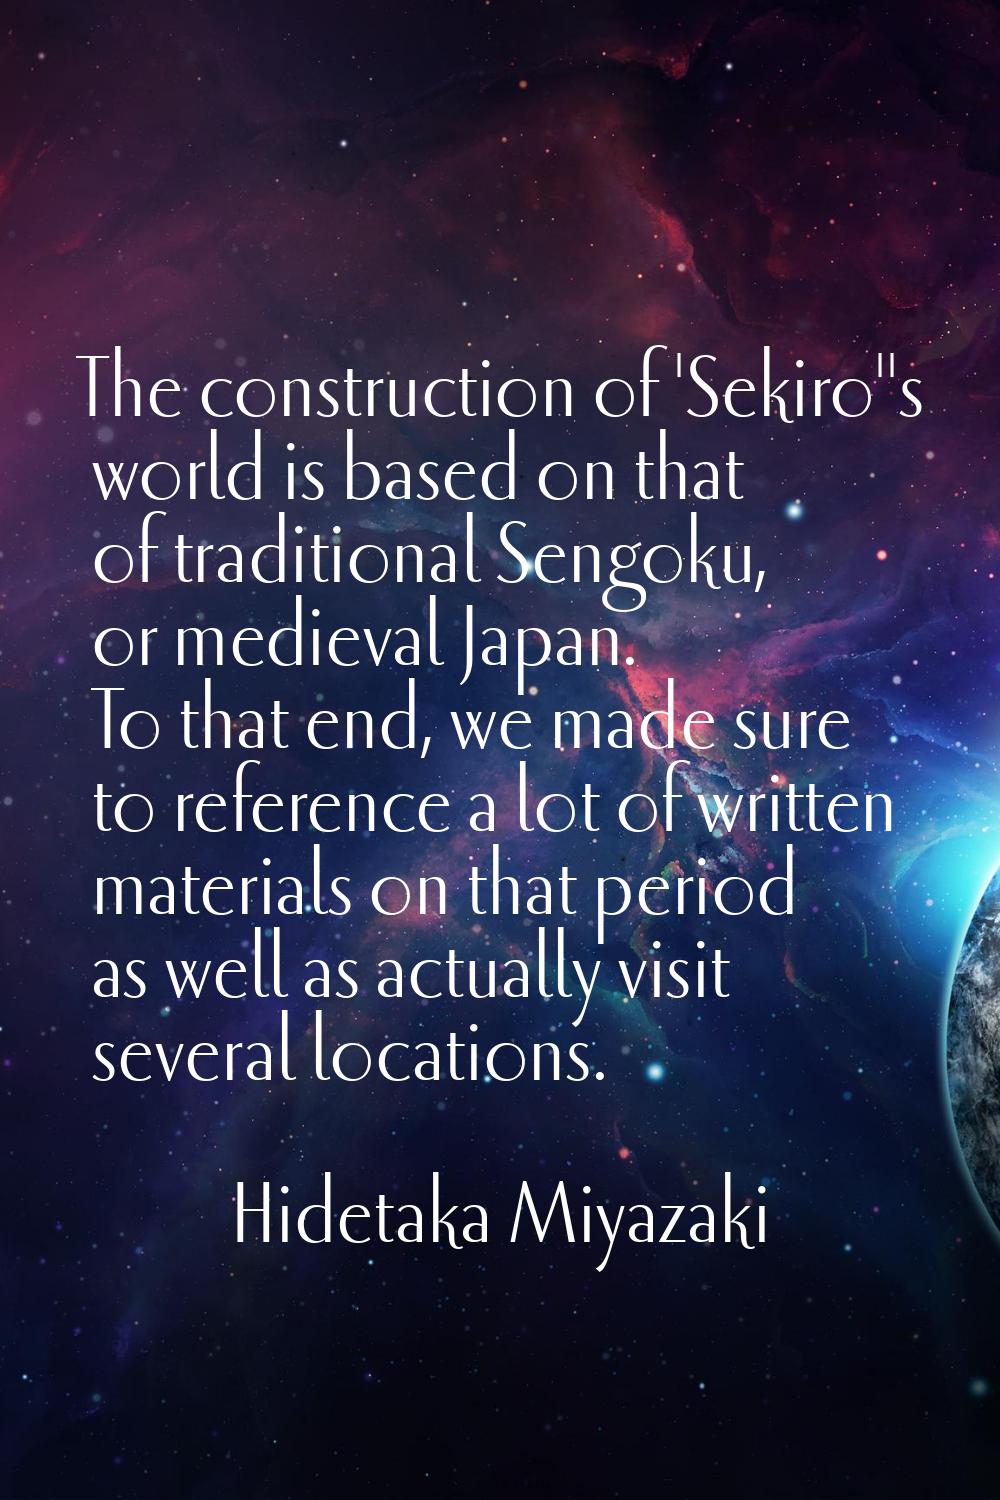 The construction of 'Sekiro''s world is based on that of traditional Sengoku, or medieval Japan. To